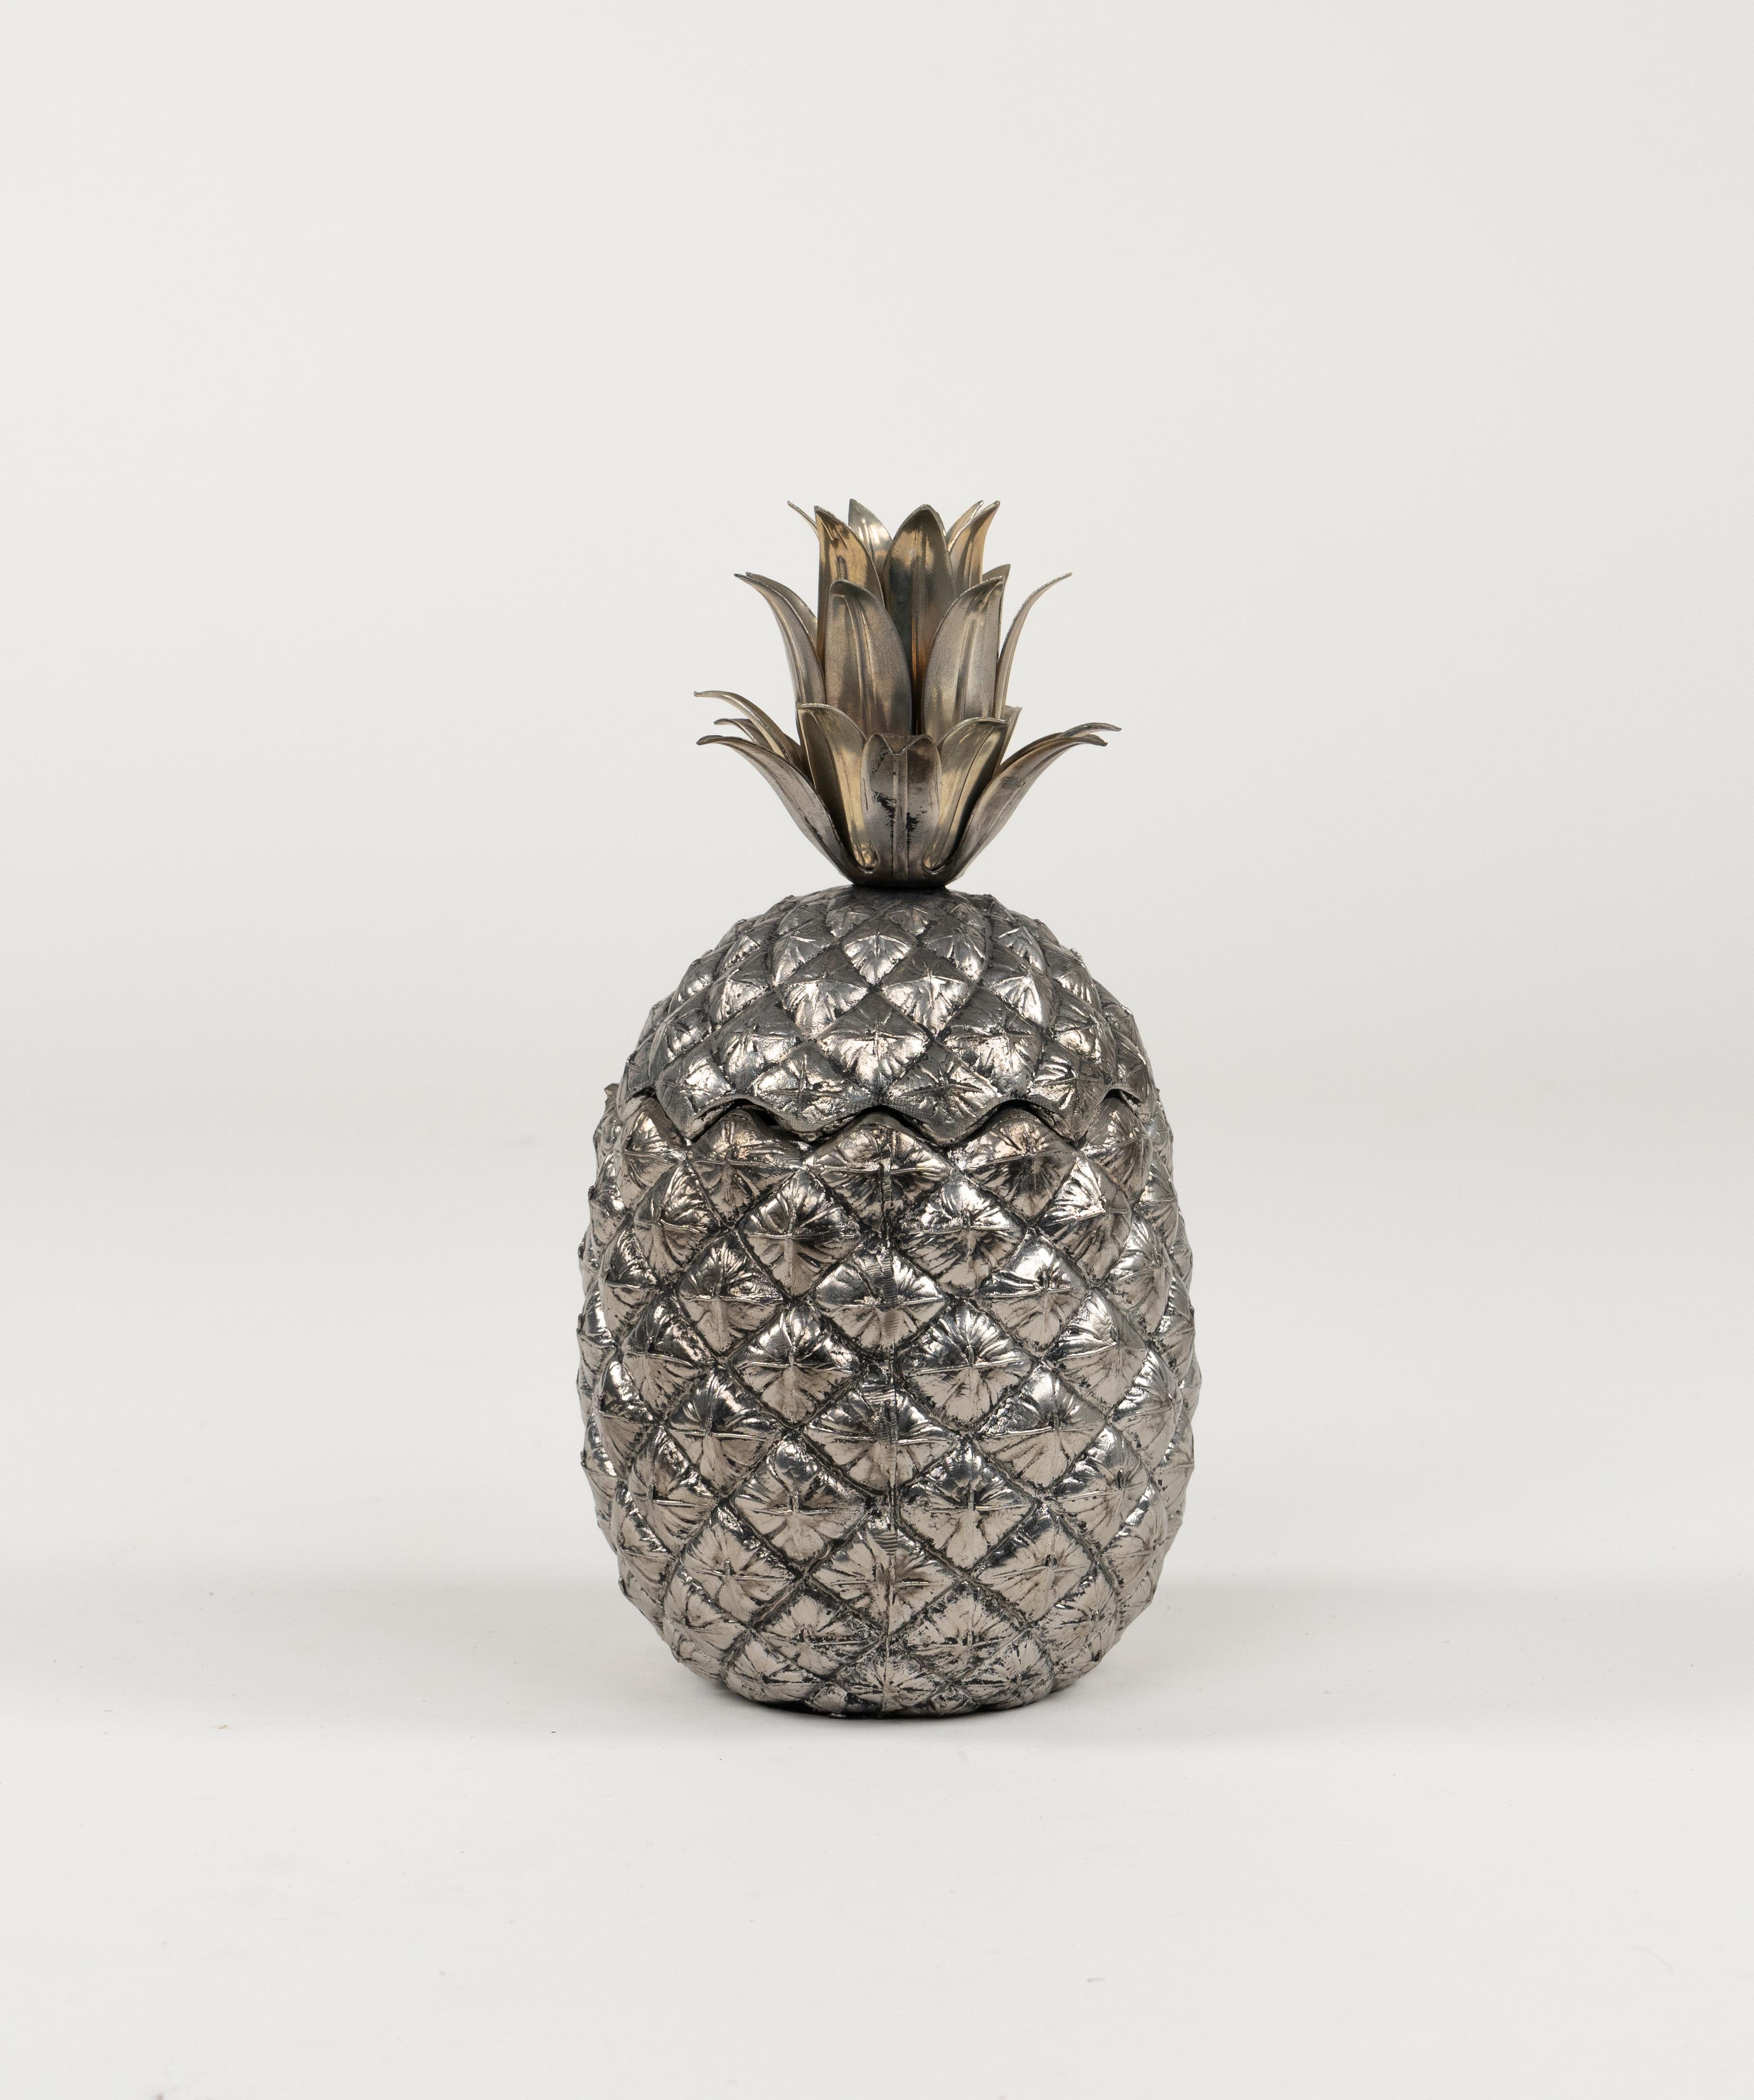 Midcentury Pewter Pineapple Form Ice Bucket by Mauro Manetti Italy, 1960s For Sale 8